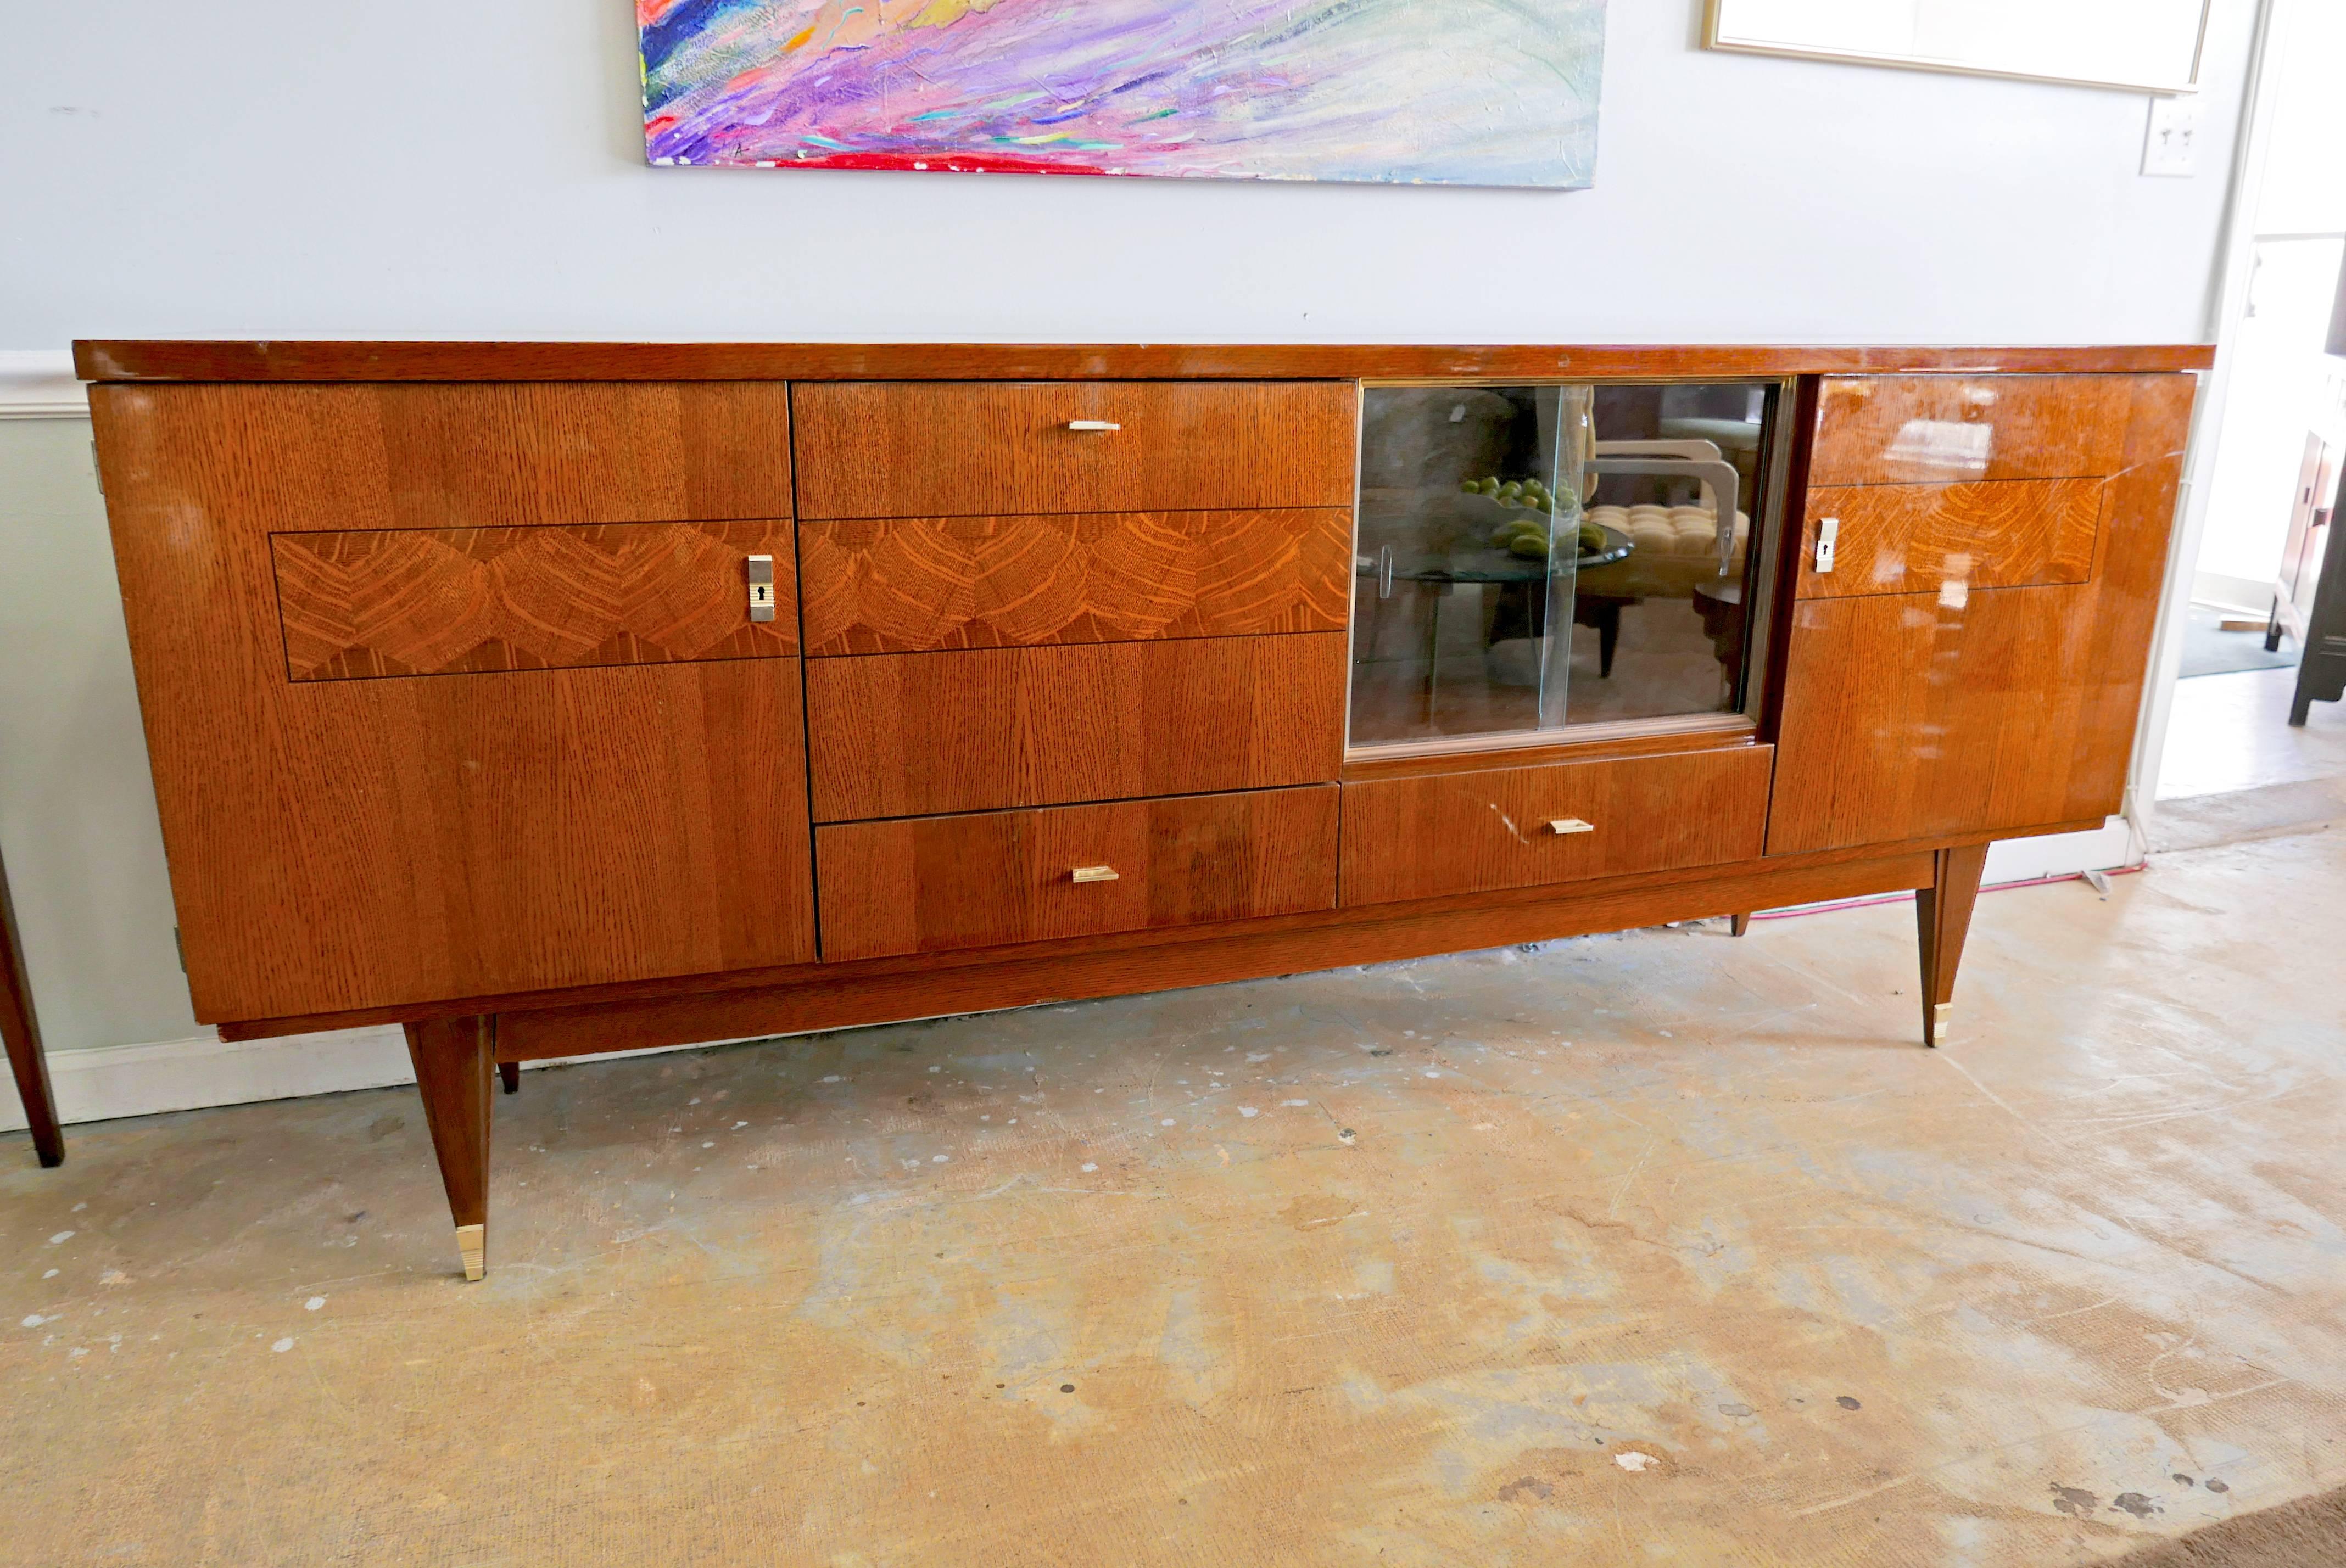 Art Deco credenza from France, circa 1930s. A glorious, glamorous heirloom piece with wonderfully detailed facade and hardware. Cabinet door drops down on hinges, other cabinet has double glass doors. Voluminous storage capacity. An entertainment